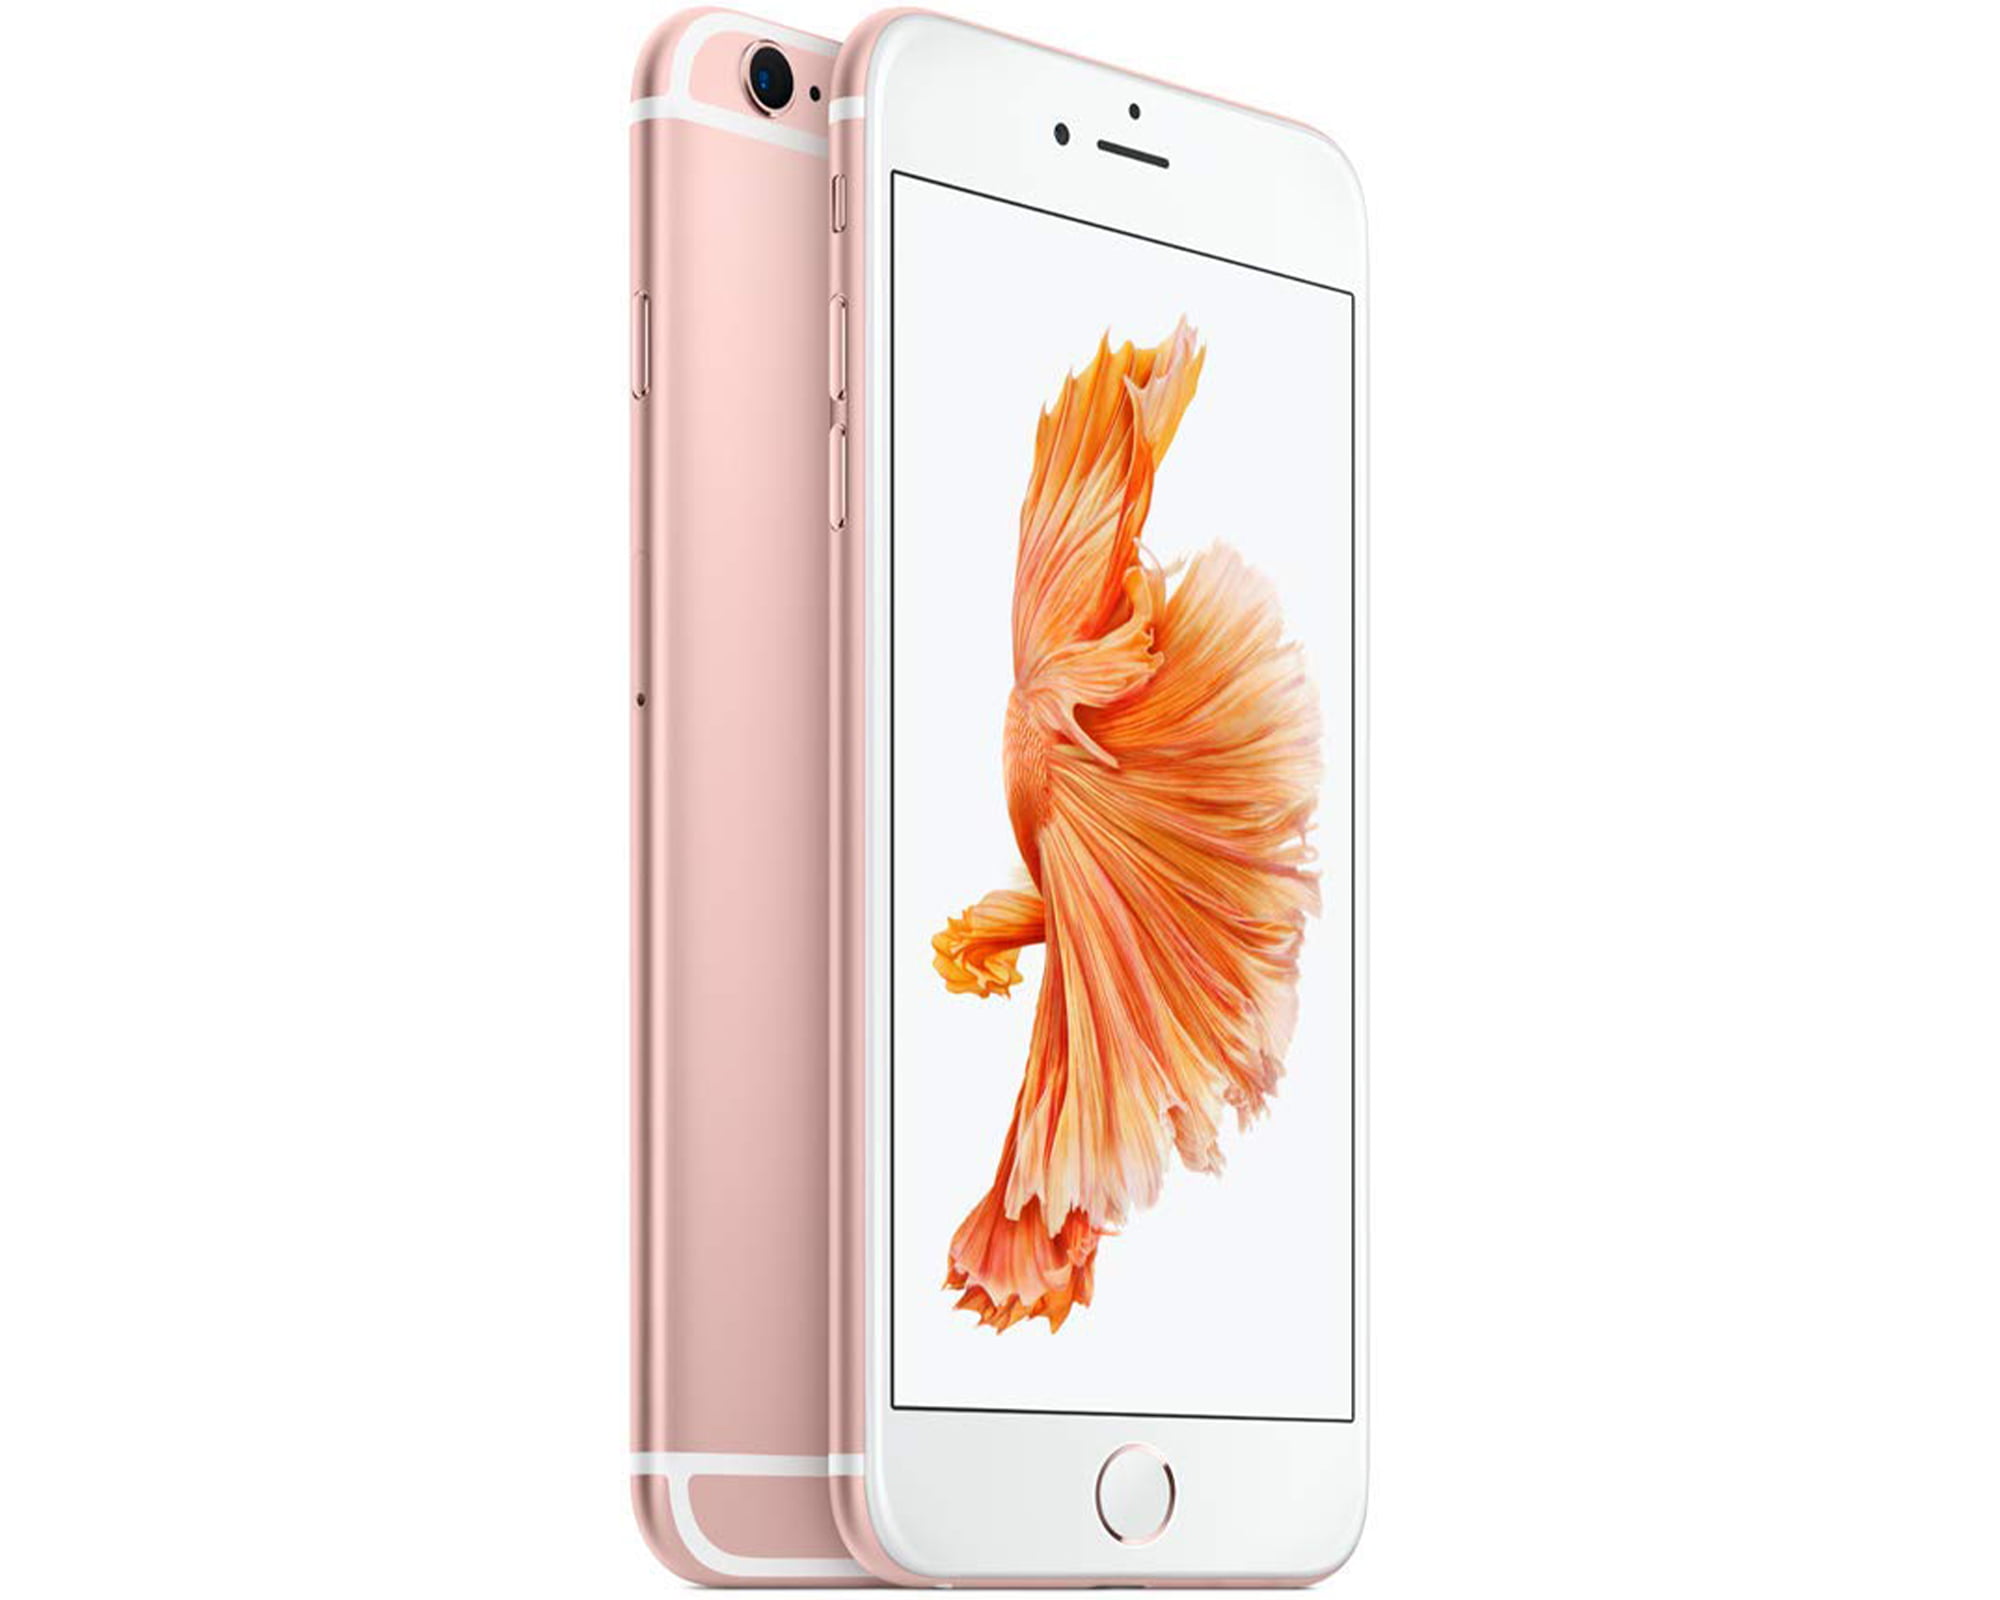 Apple iPhone 6s 32GB Unlocked GSM 4G LTE Dual-Core Phone w/ 12 MP Camera -  Rose Gold (Used)